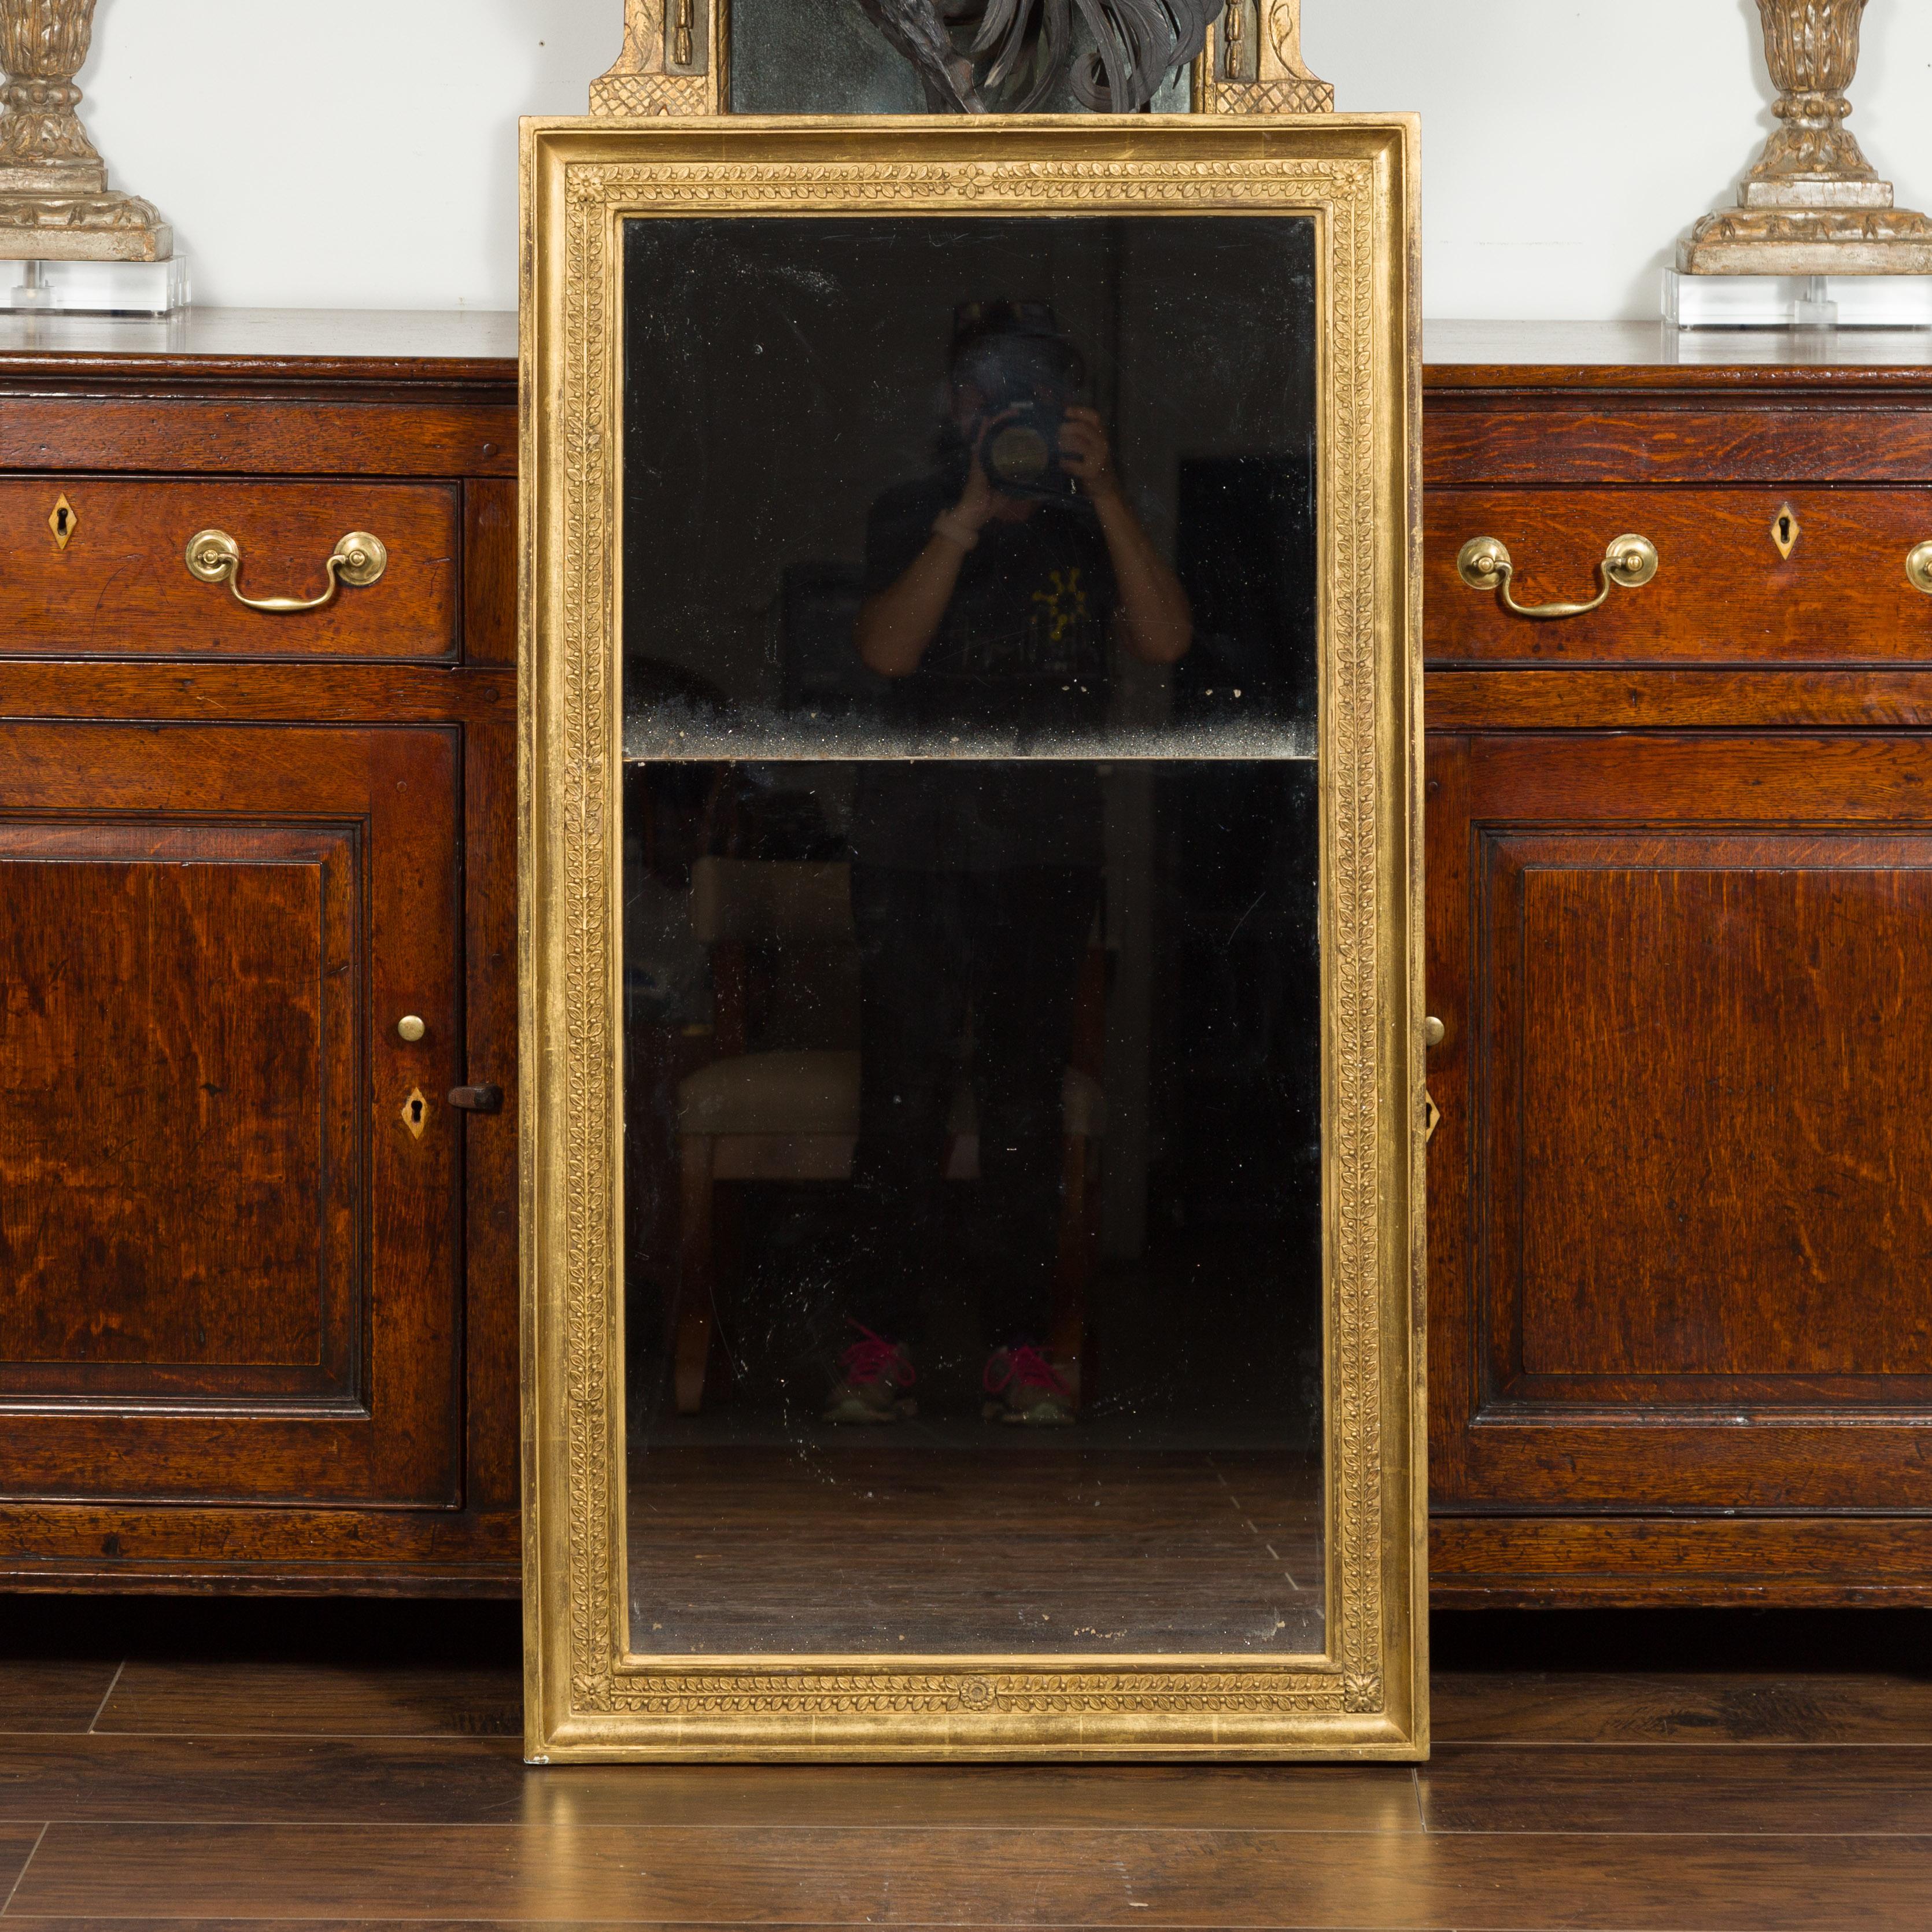 A French giltwood rectangular mirror from the early 20th century, with foliage and rosette motifs and split mirror. Created in France at the turn of the century, this gilt mirror features an elegant linear frame accented with a calm frieze of